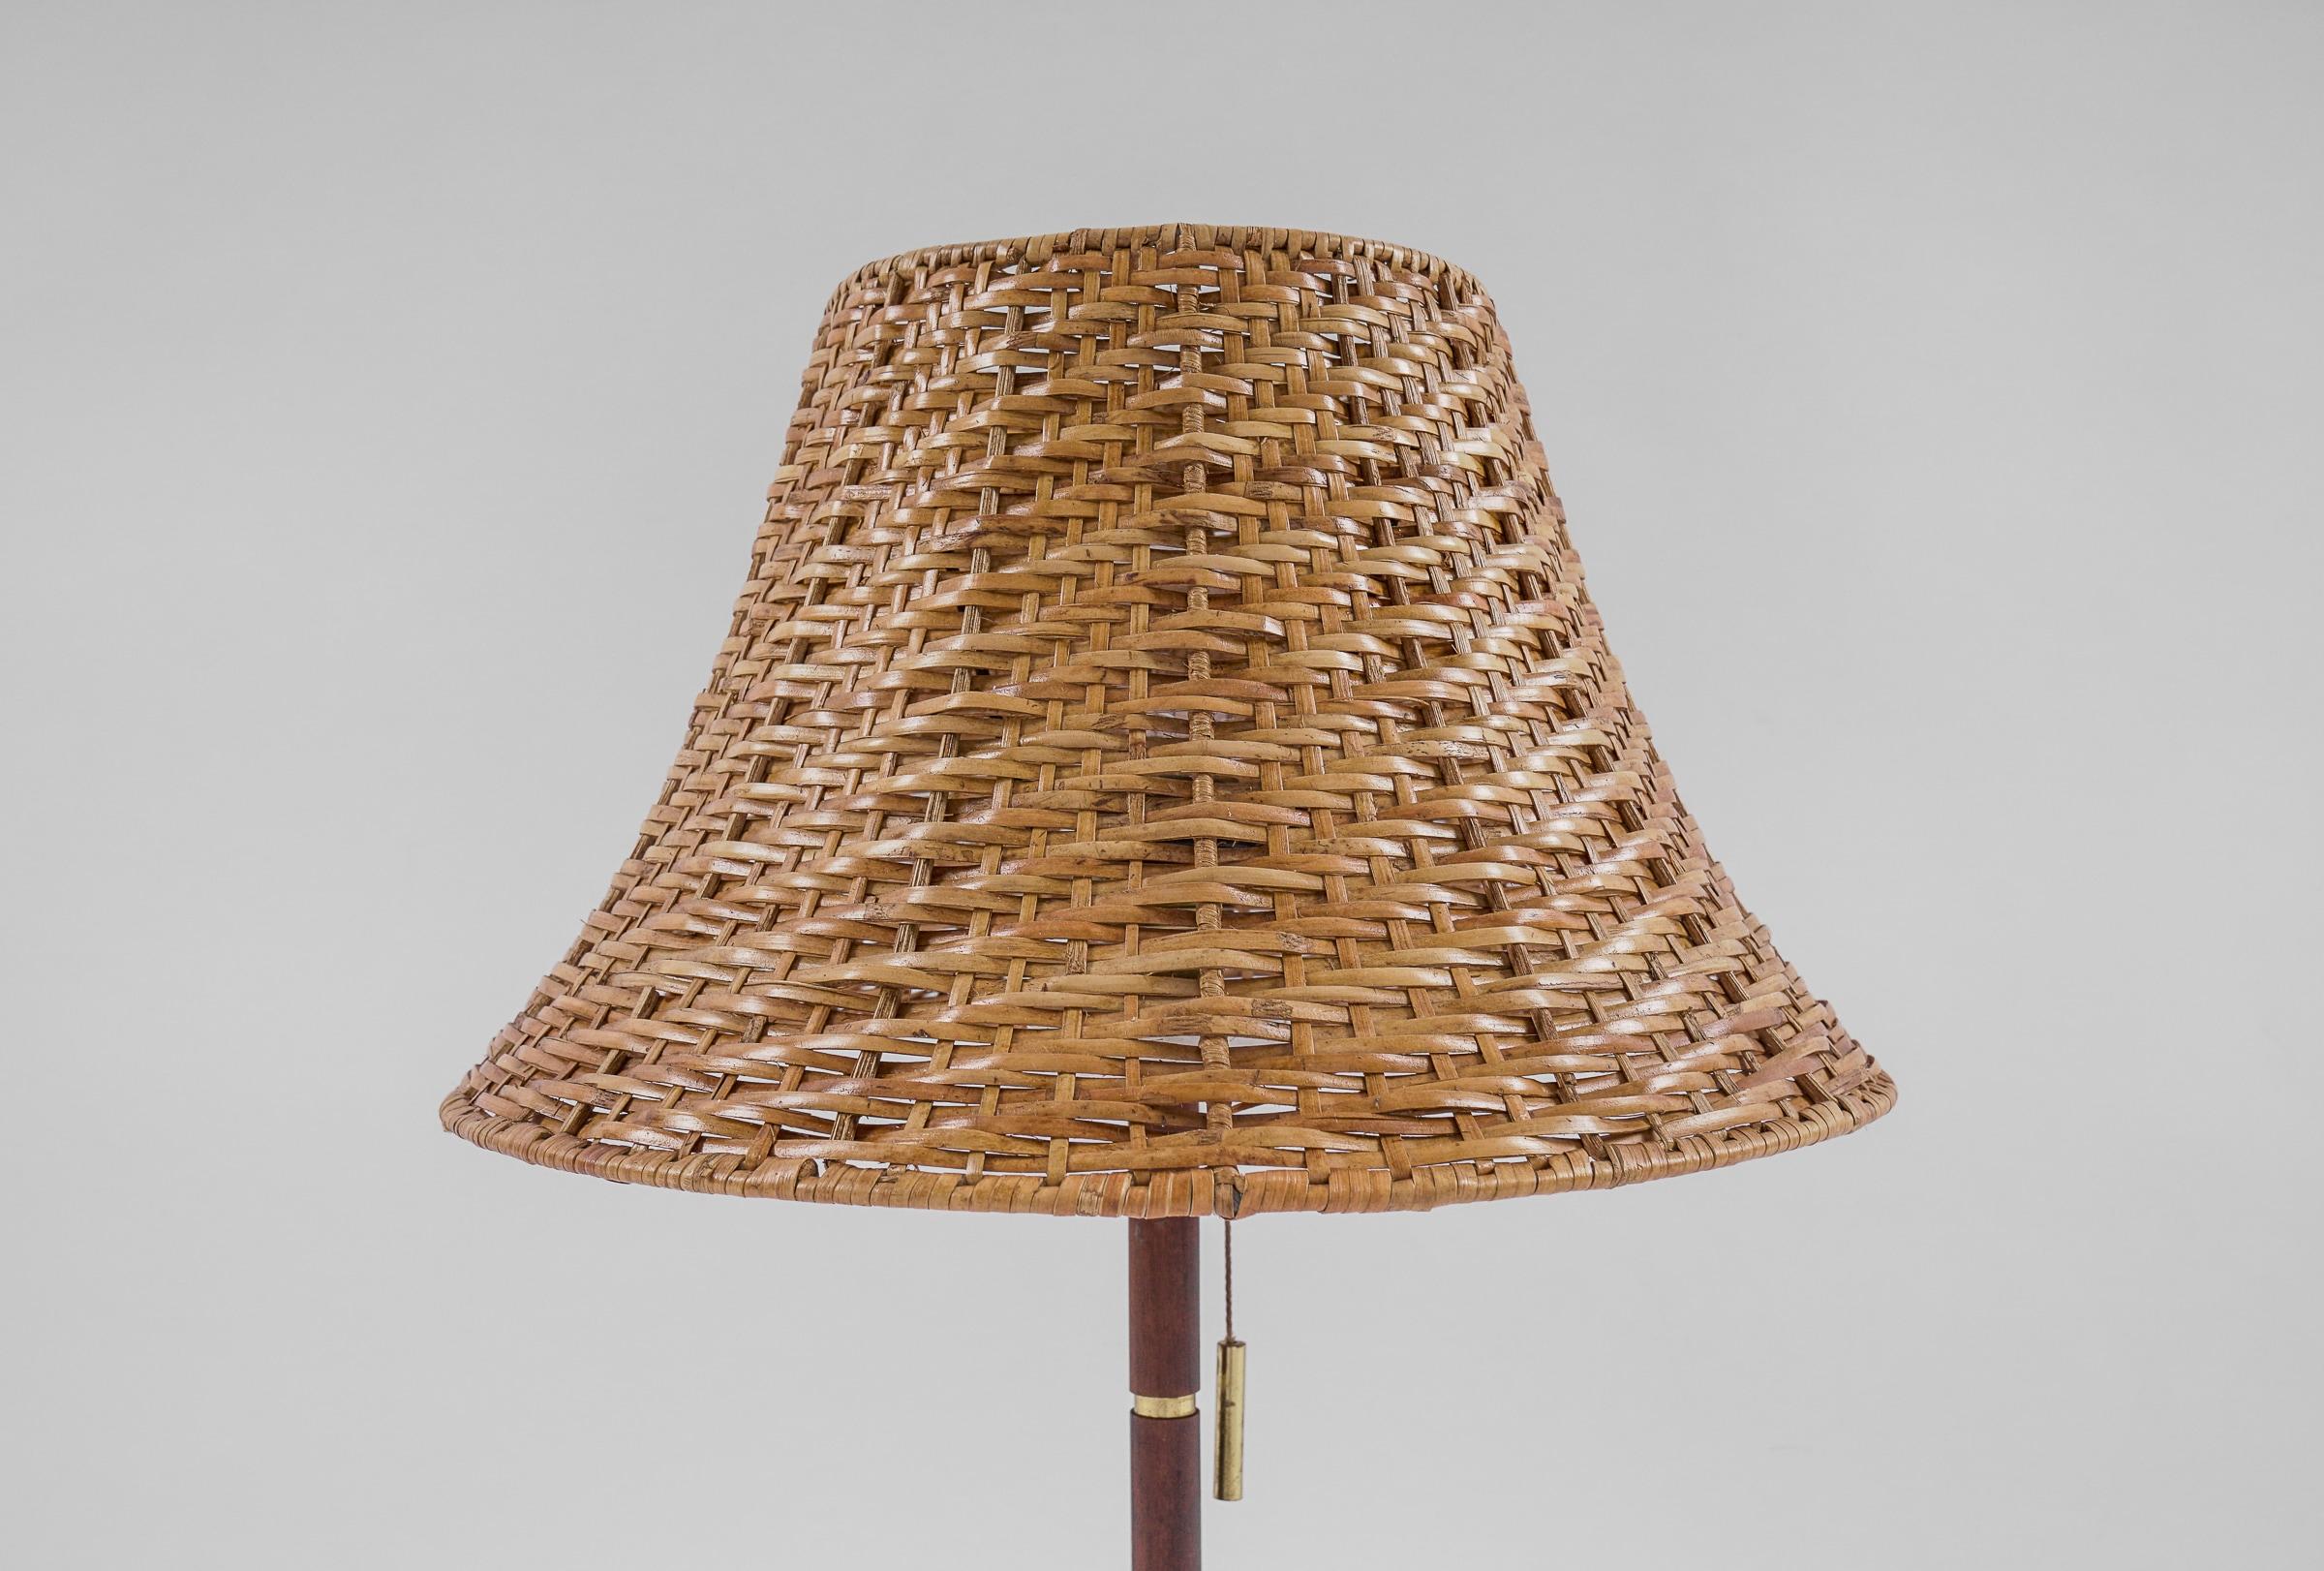 Lovely Mid-Century Modern Table Lamp in Brass, Wicker and Teak, 1950s, Austria For Sale 9